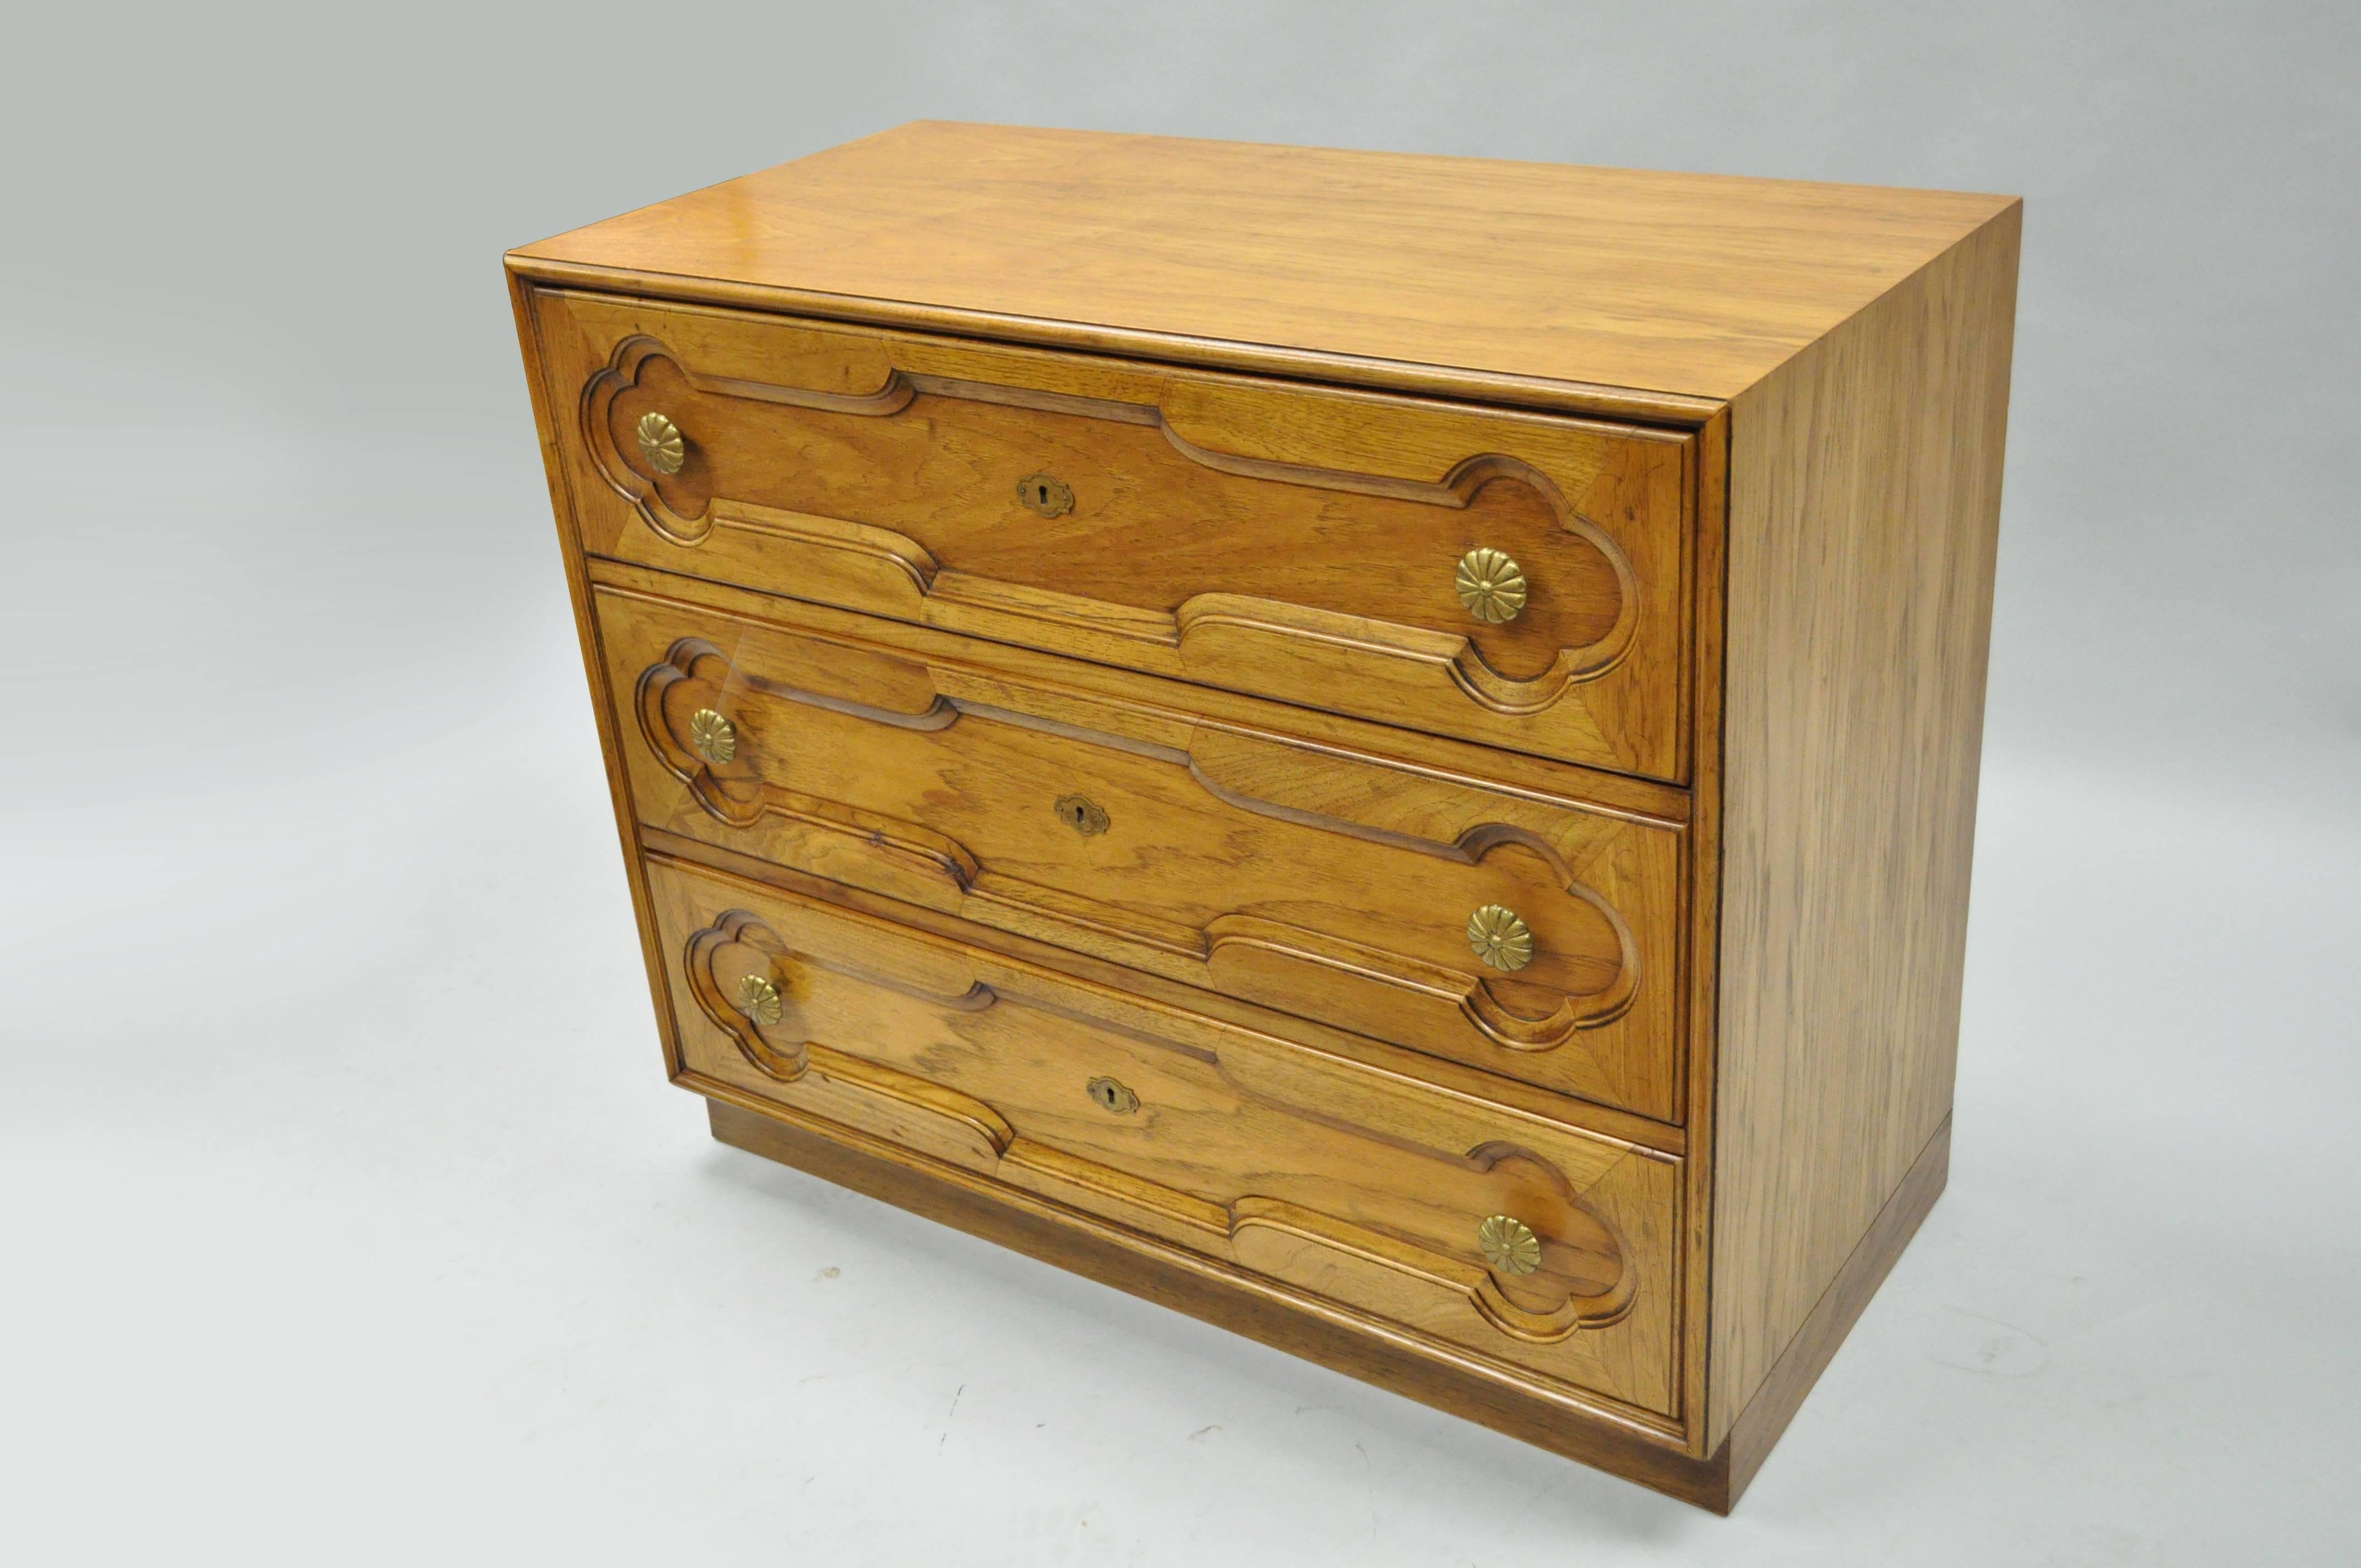 Quality three-drawer commode by Drexel Heritage. Item features solid brass hardware, dovetail constructed drawers, carved drawer fronts and clean lines. Style and quality is very similar to that of Dorothy Draper. Designer is unconfirmed.